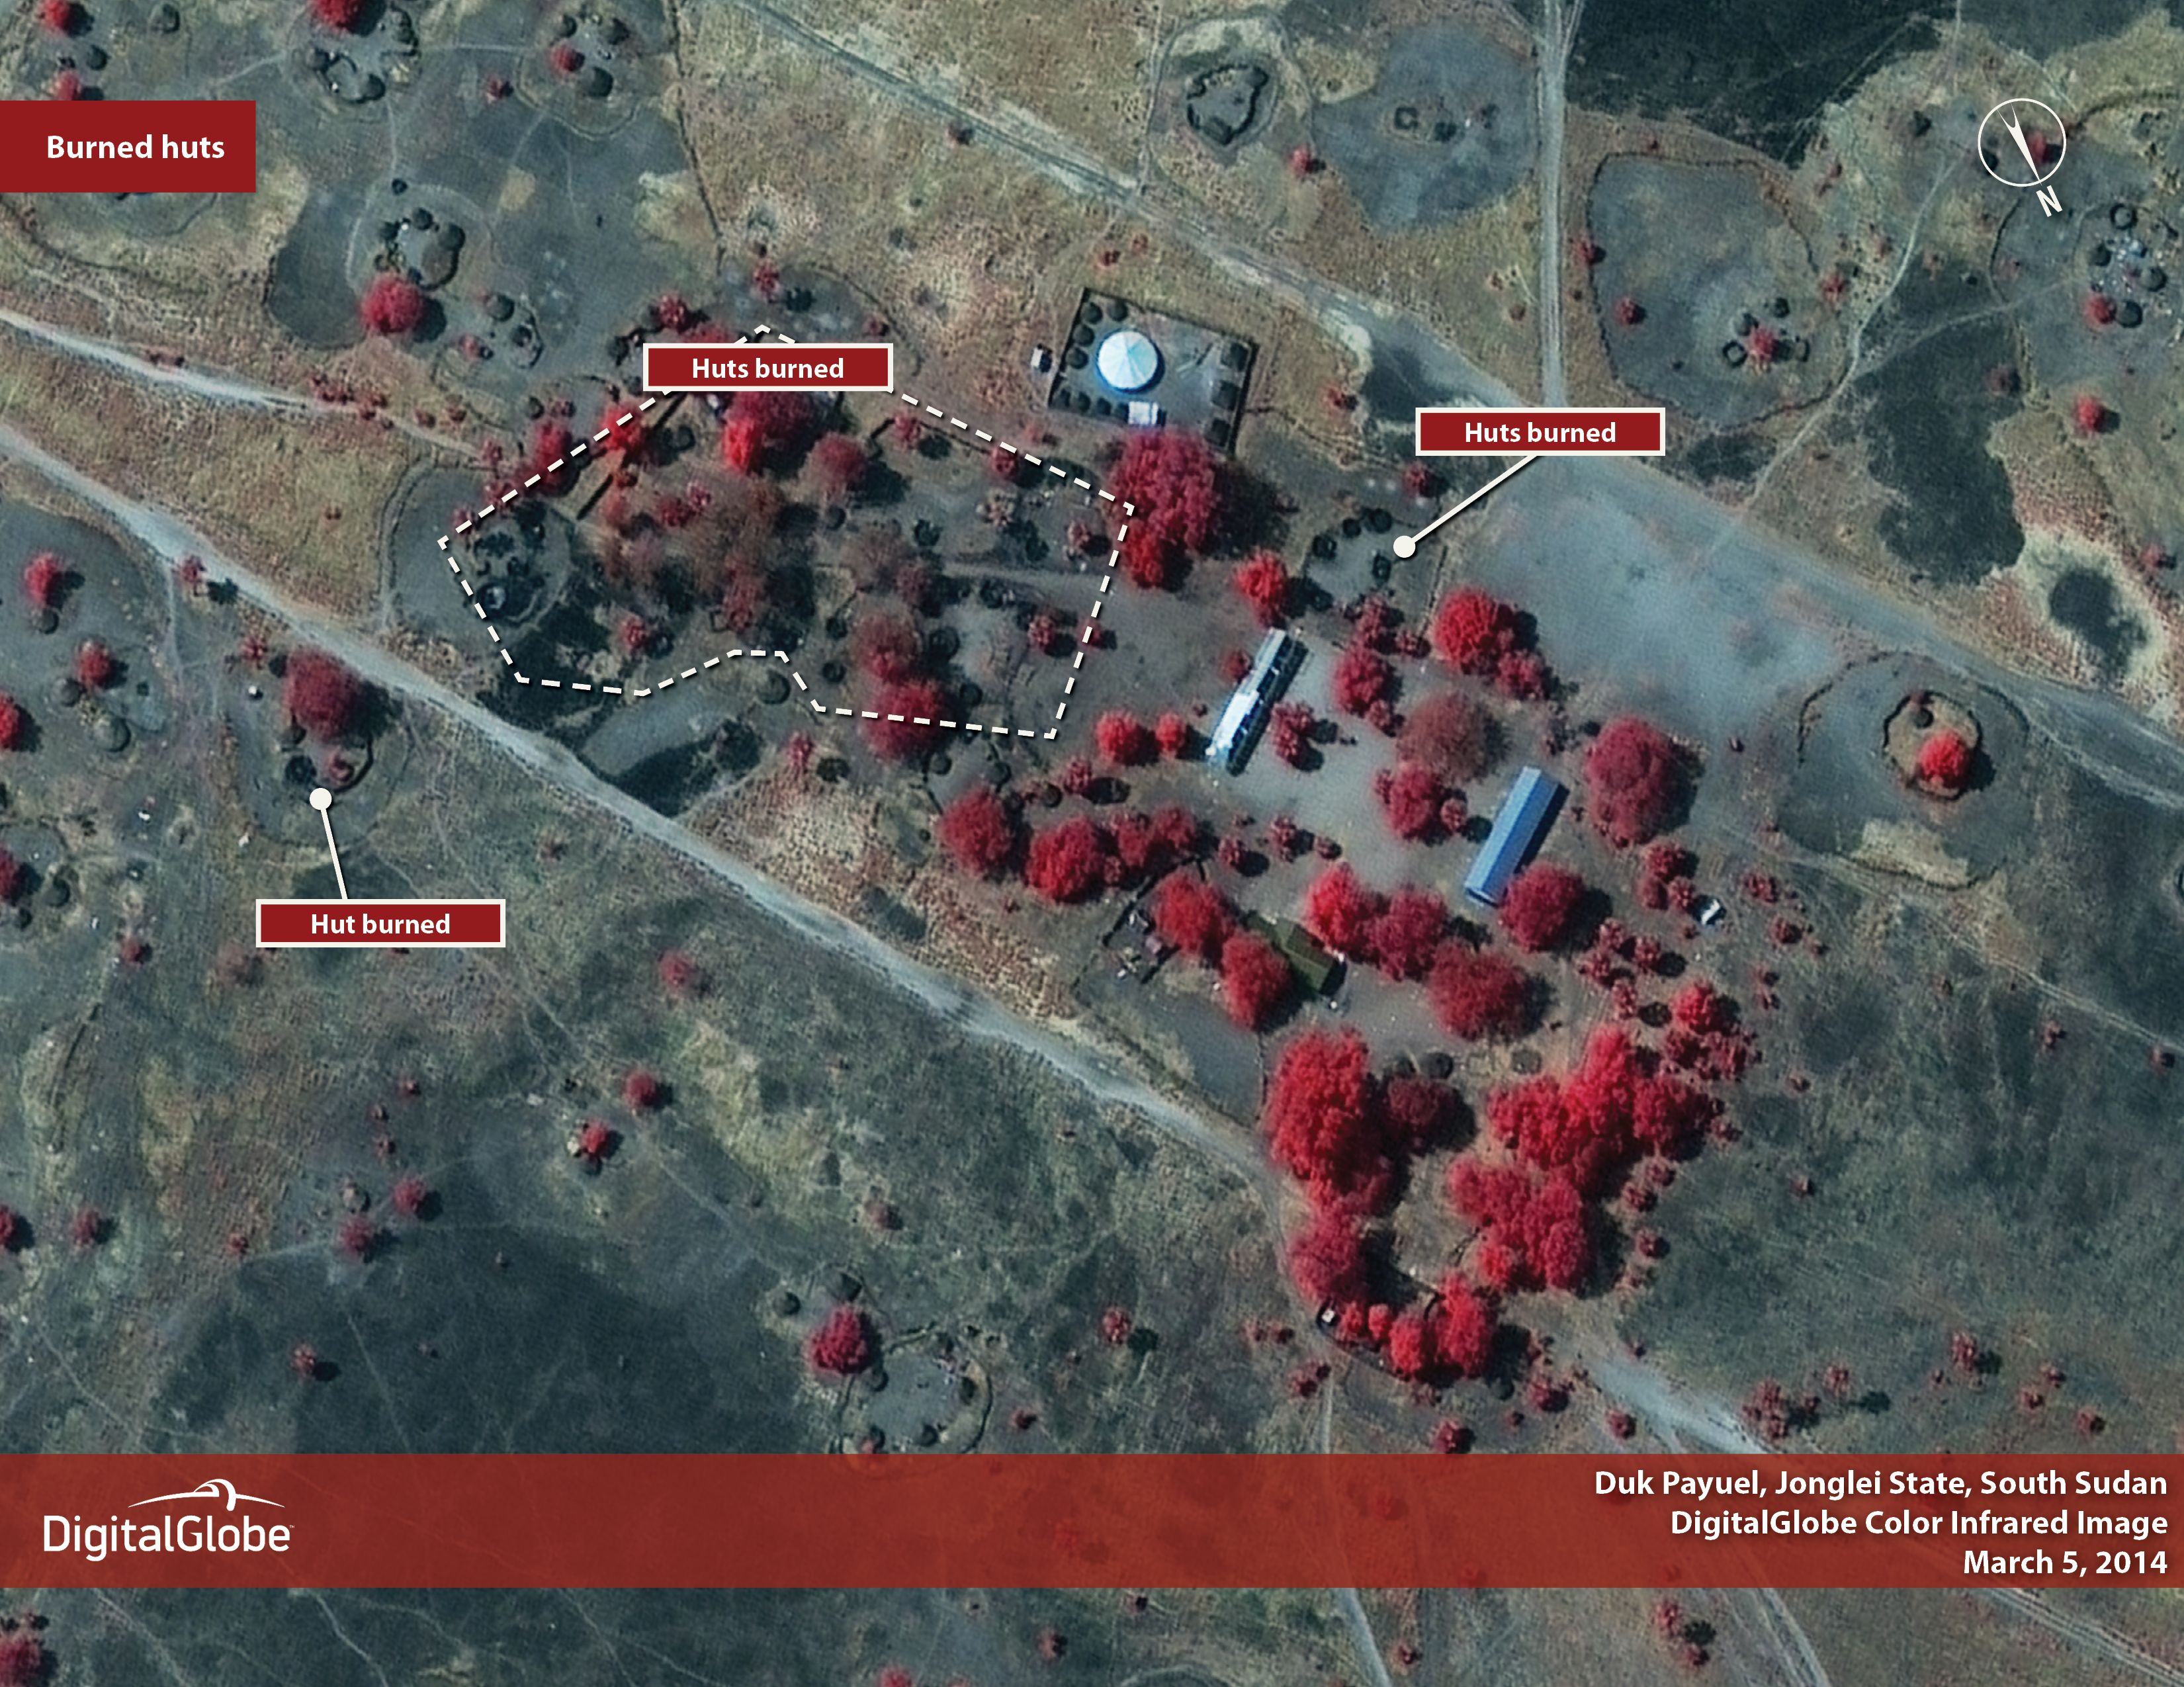 IMAGES 4 and 5: Destruction and looting in Duk Payeul since February 9, 2014.